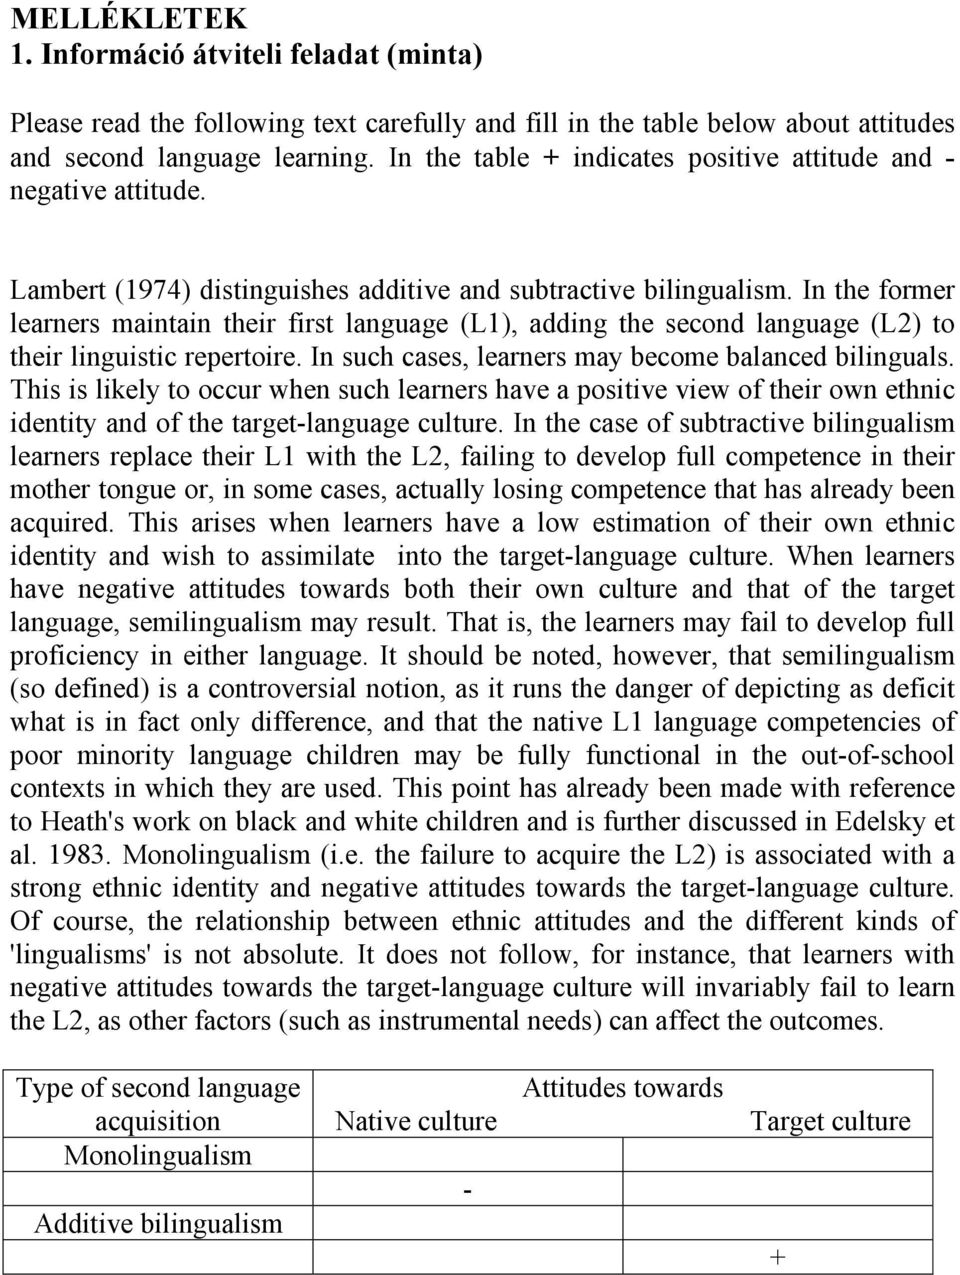 In the former learners maintain their first language (L1), adding the second language (L2) to their linguistic repertoire. In such cases, learners may become balanced bilinguals.